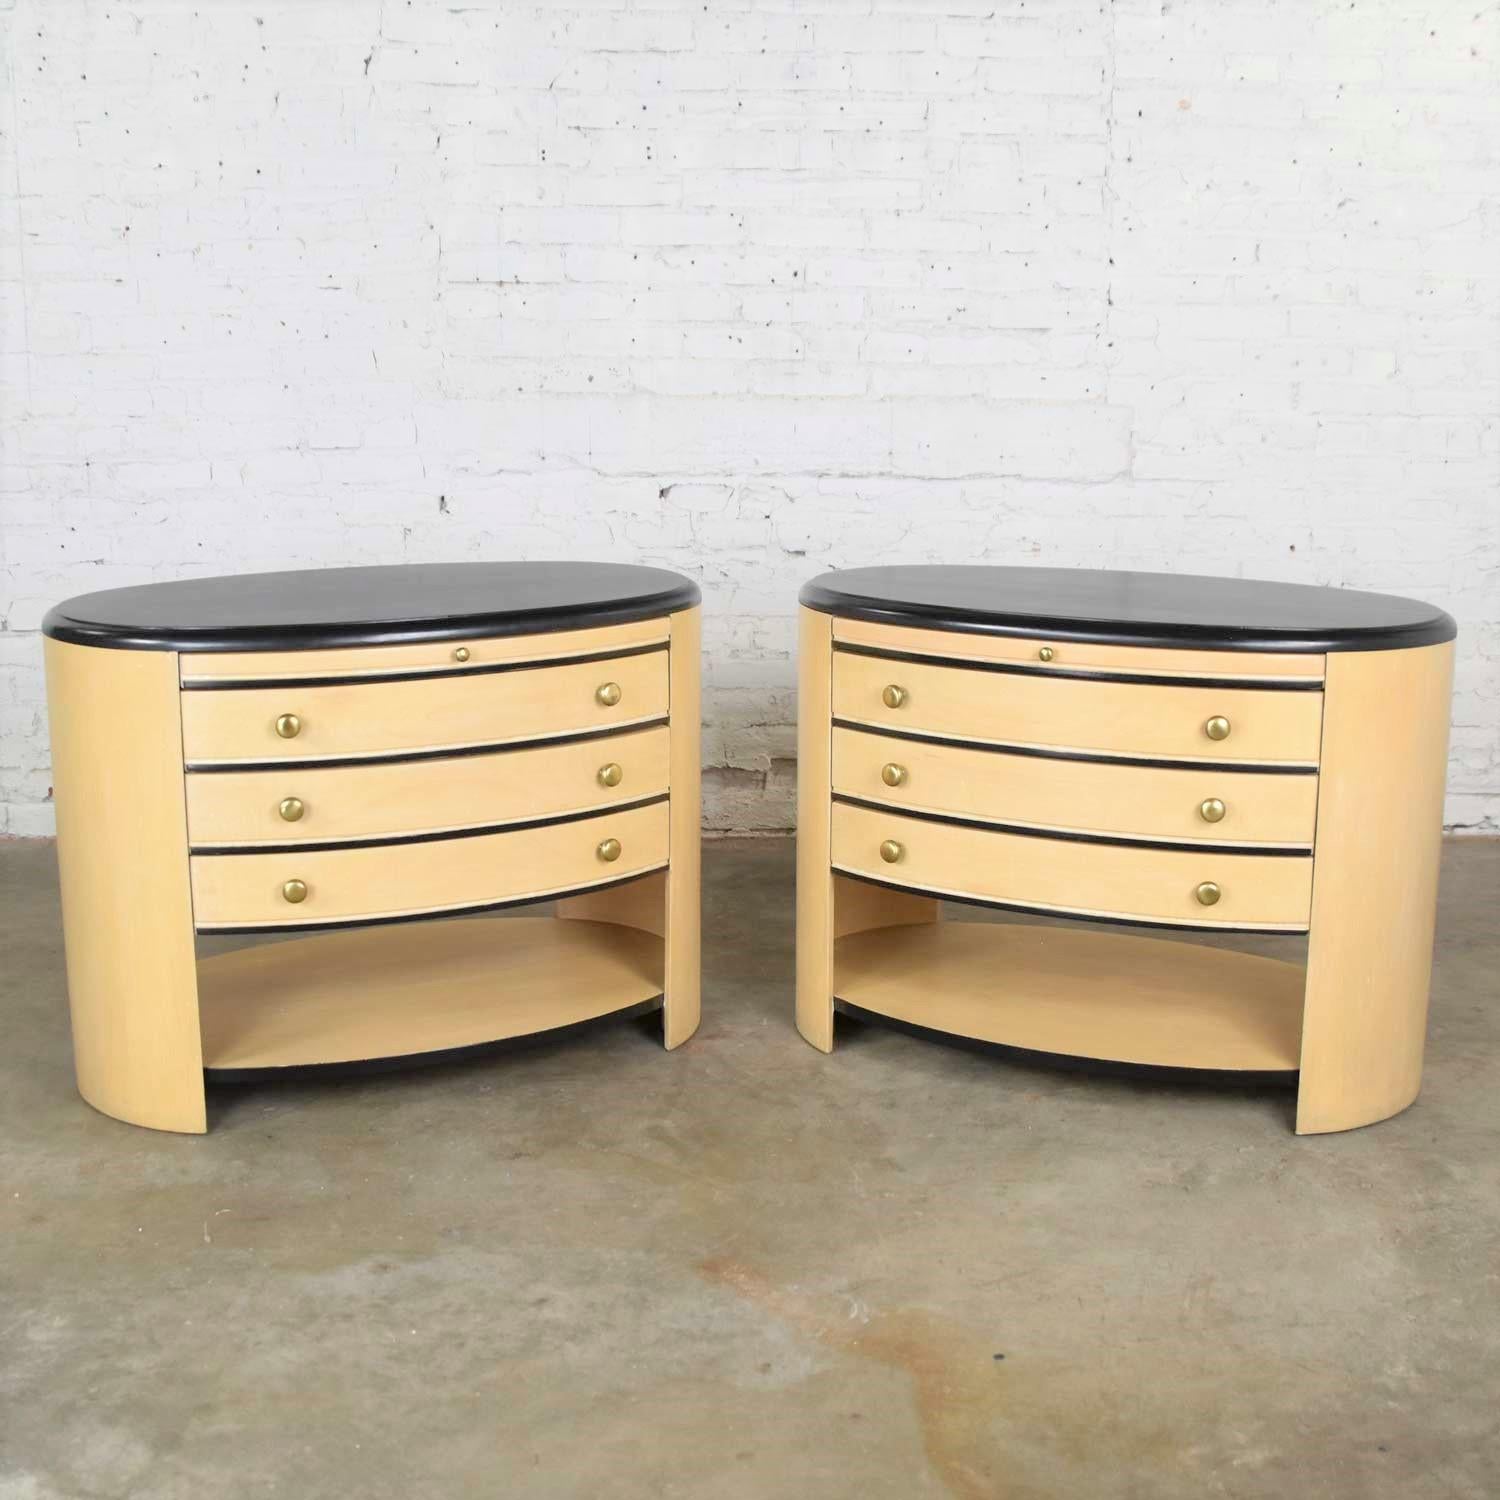 Unknown Vintage Modern Pair of Oval Blonde and Black Nightstands or Bedside Cabinets